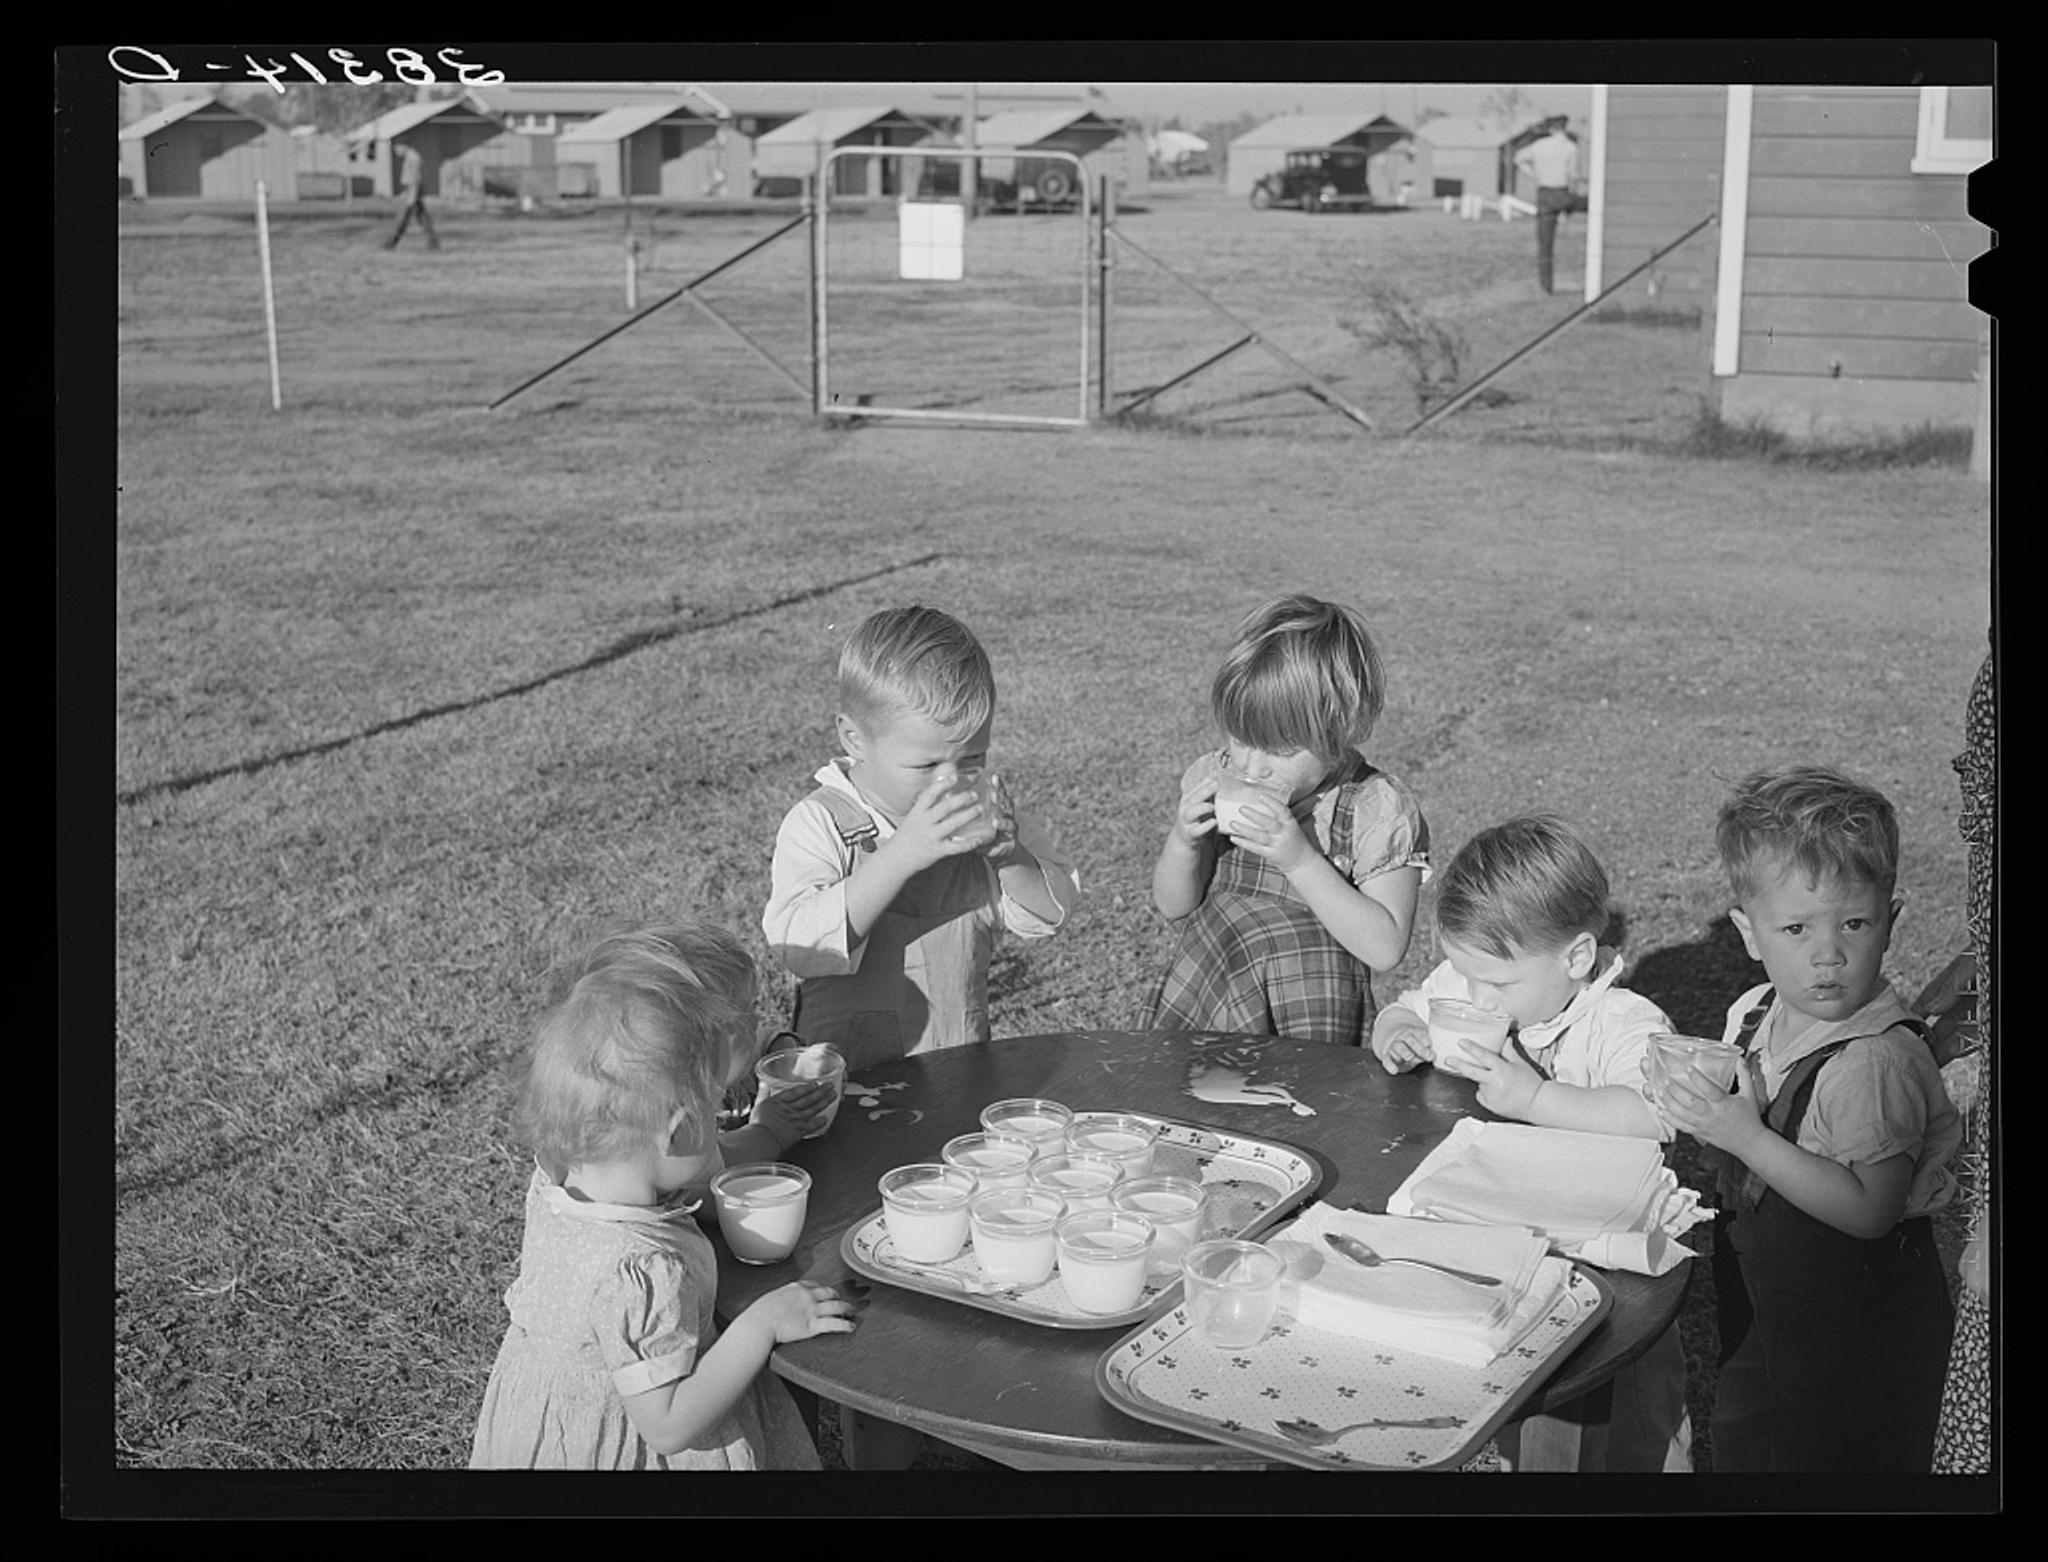 A black and white image of young children drinking milk from a tray on a table outdoors.